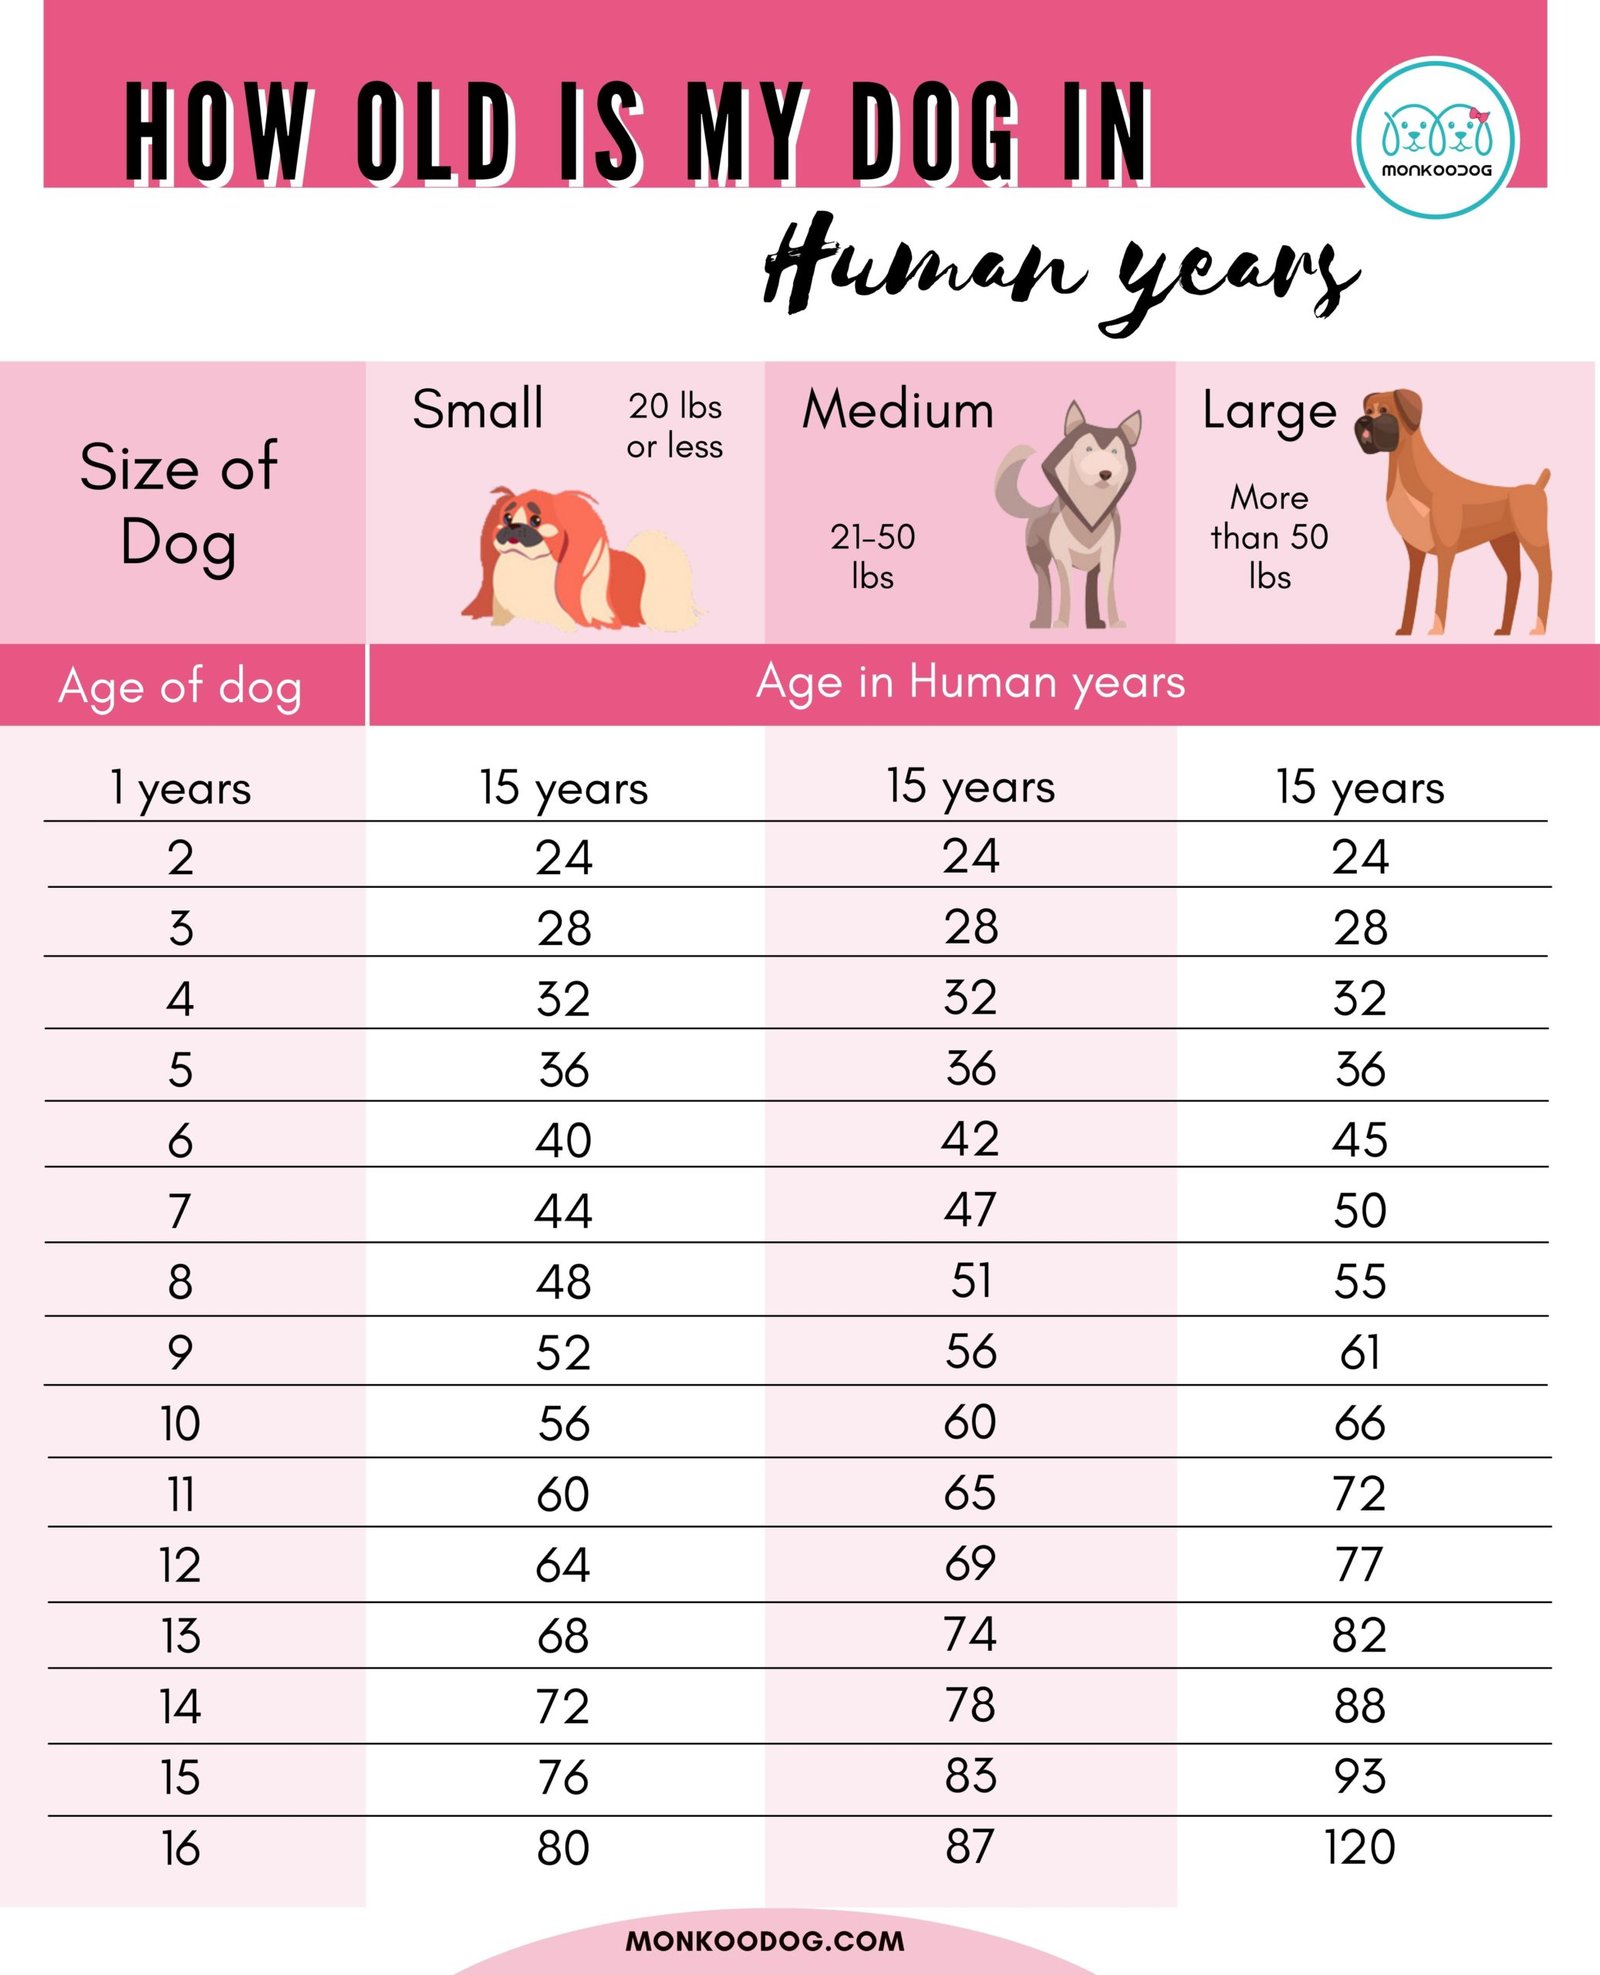 how old is a dog in human years